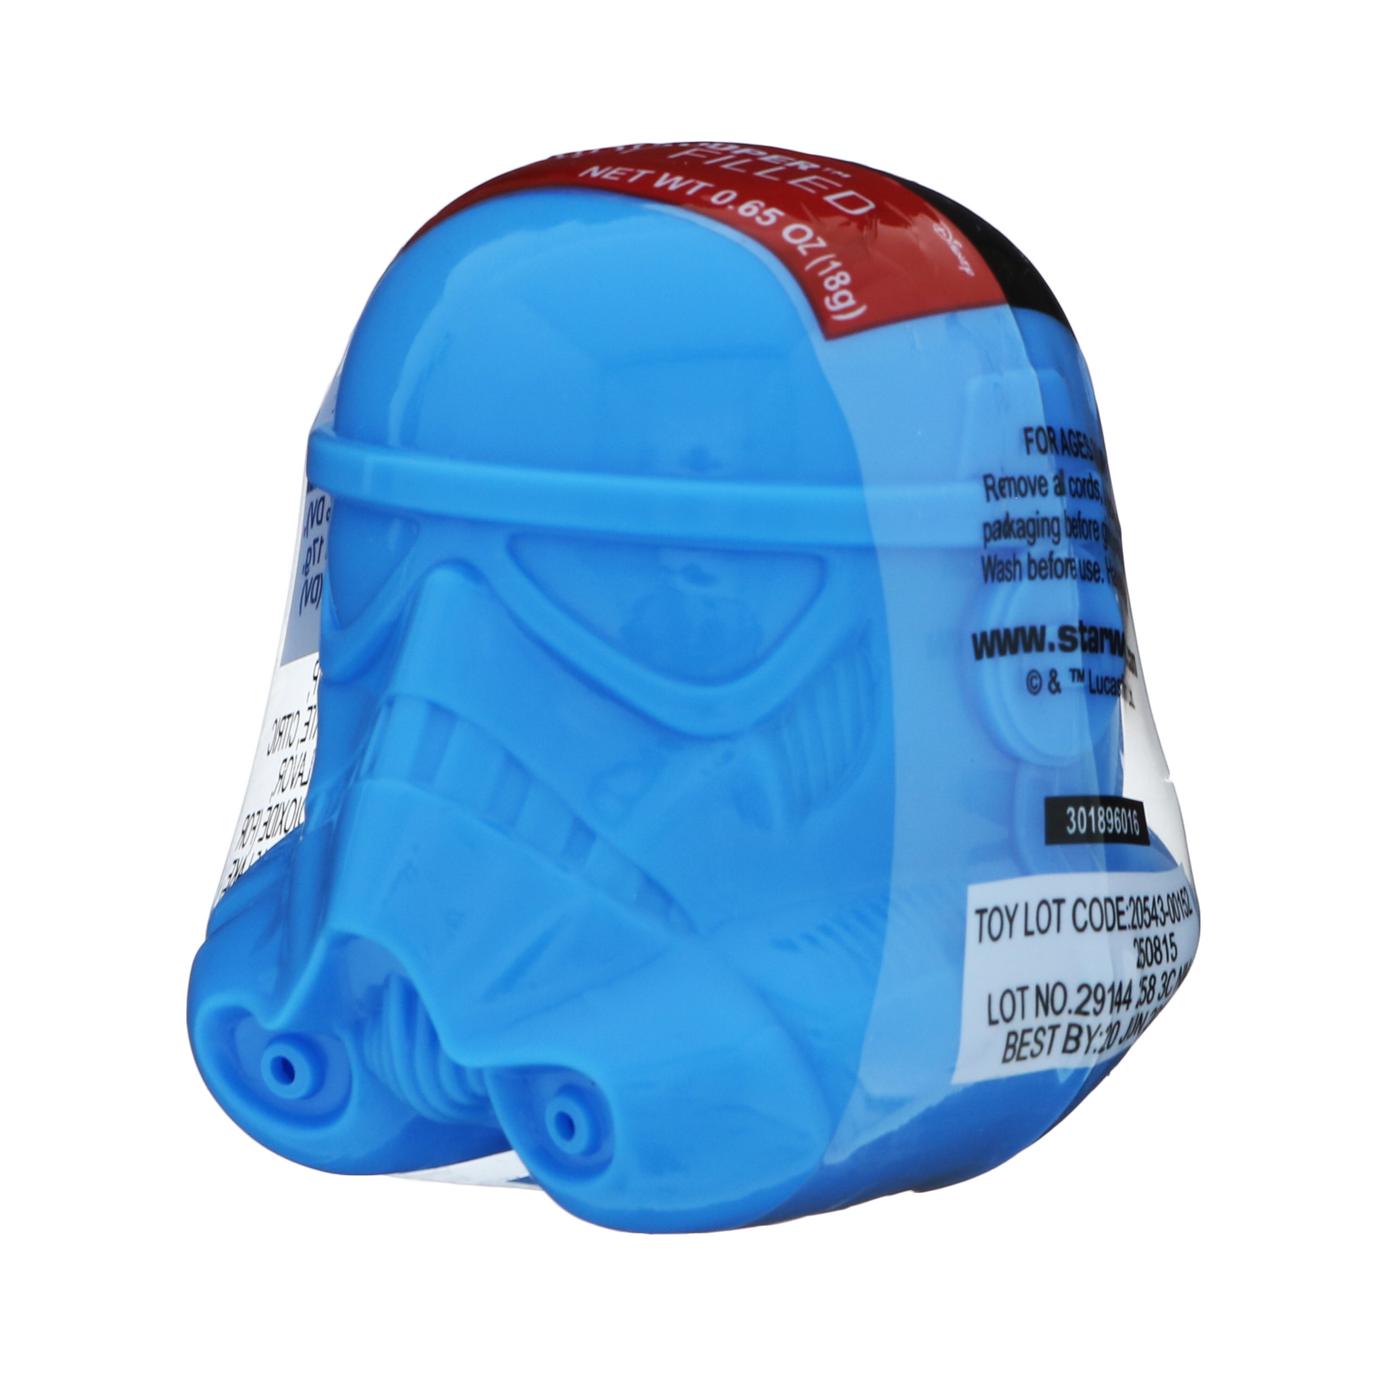 Star Wars Single Egg w/candy; image 2 of 7